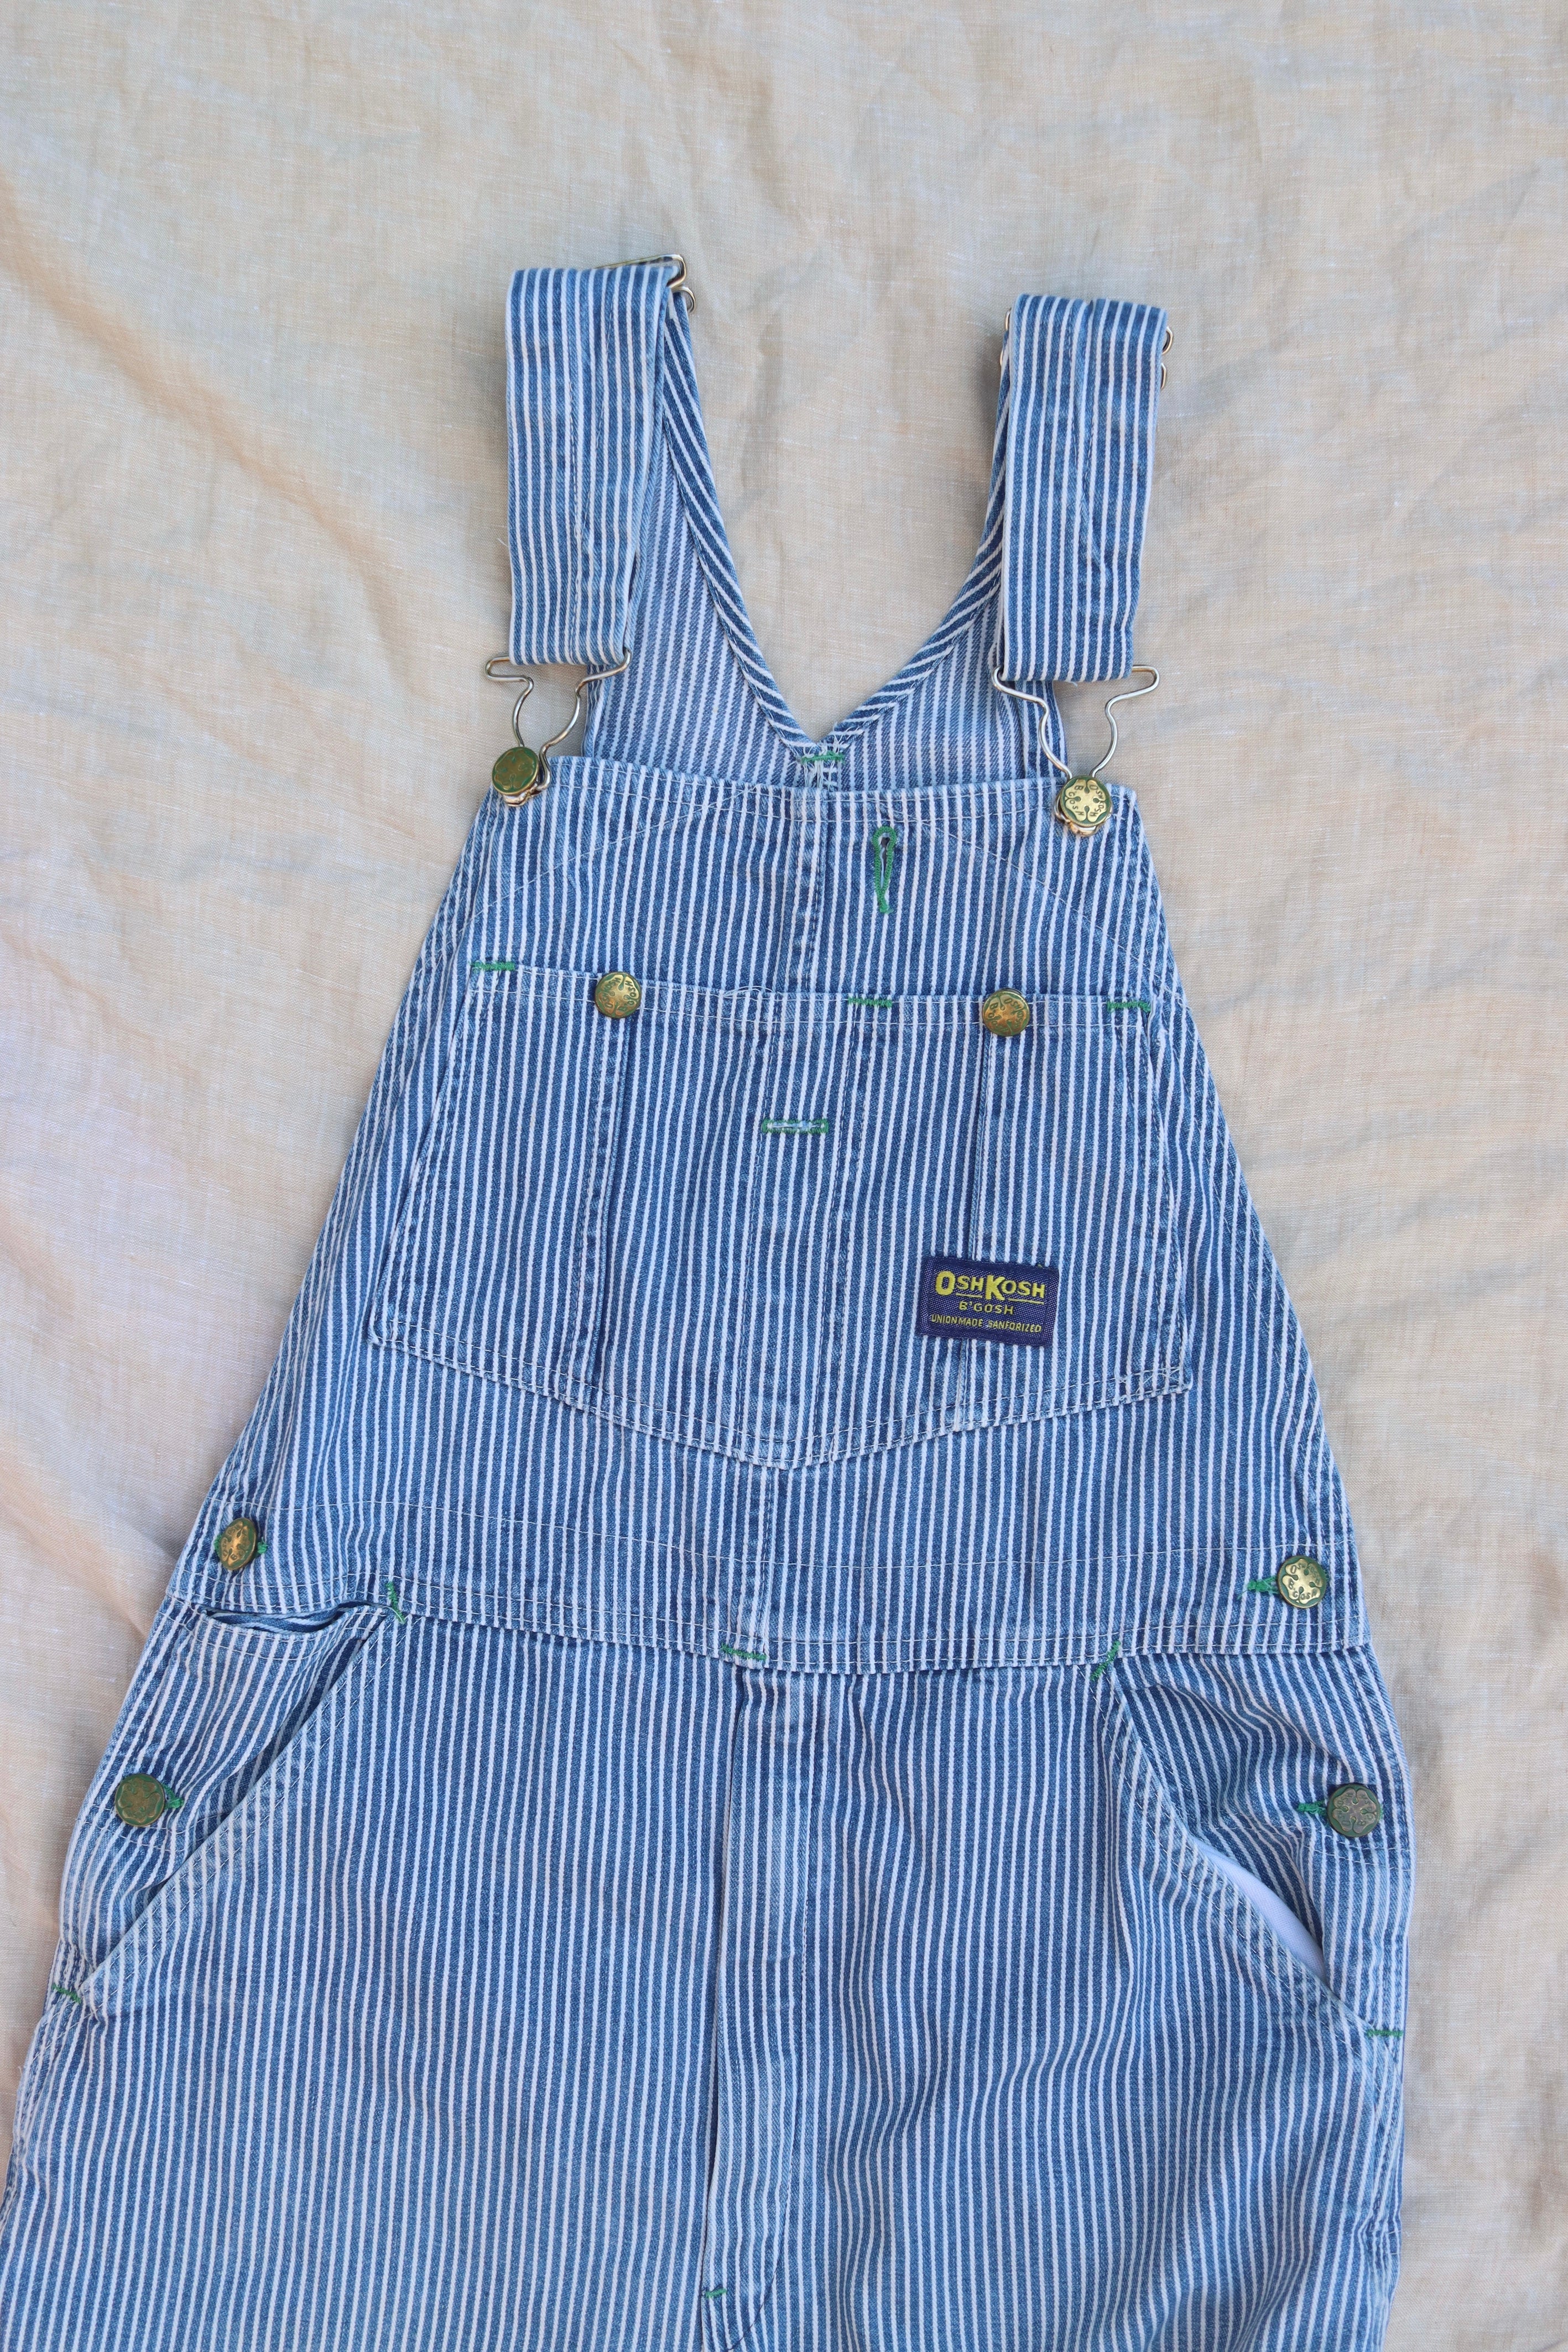 Vintage OshKosh striped overalls - Adult size M - Made in USA